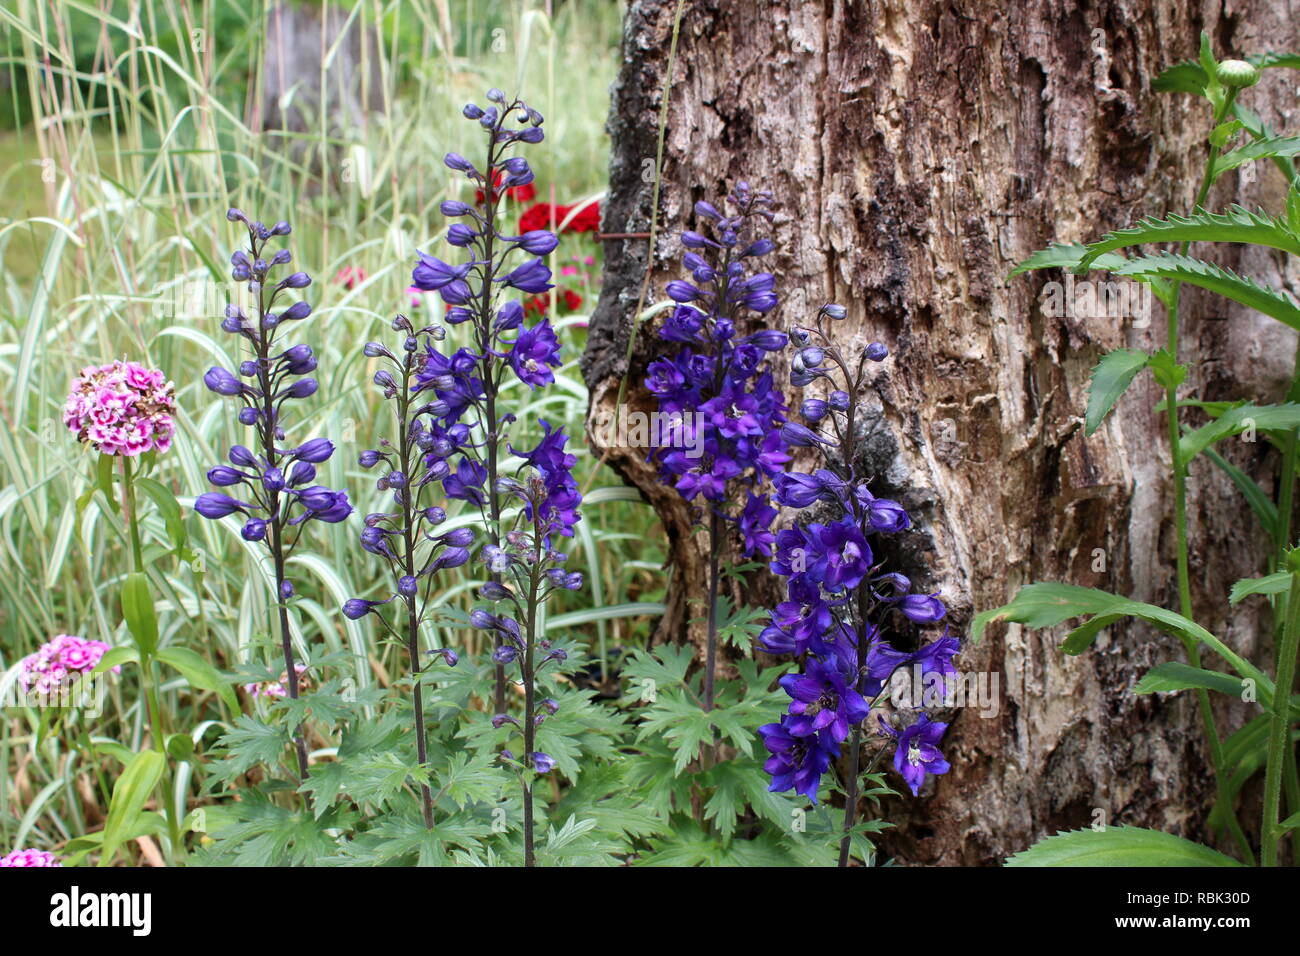 Deep Purple Delphinium Blooming Next To An Old Stump Stock Photo